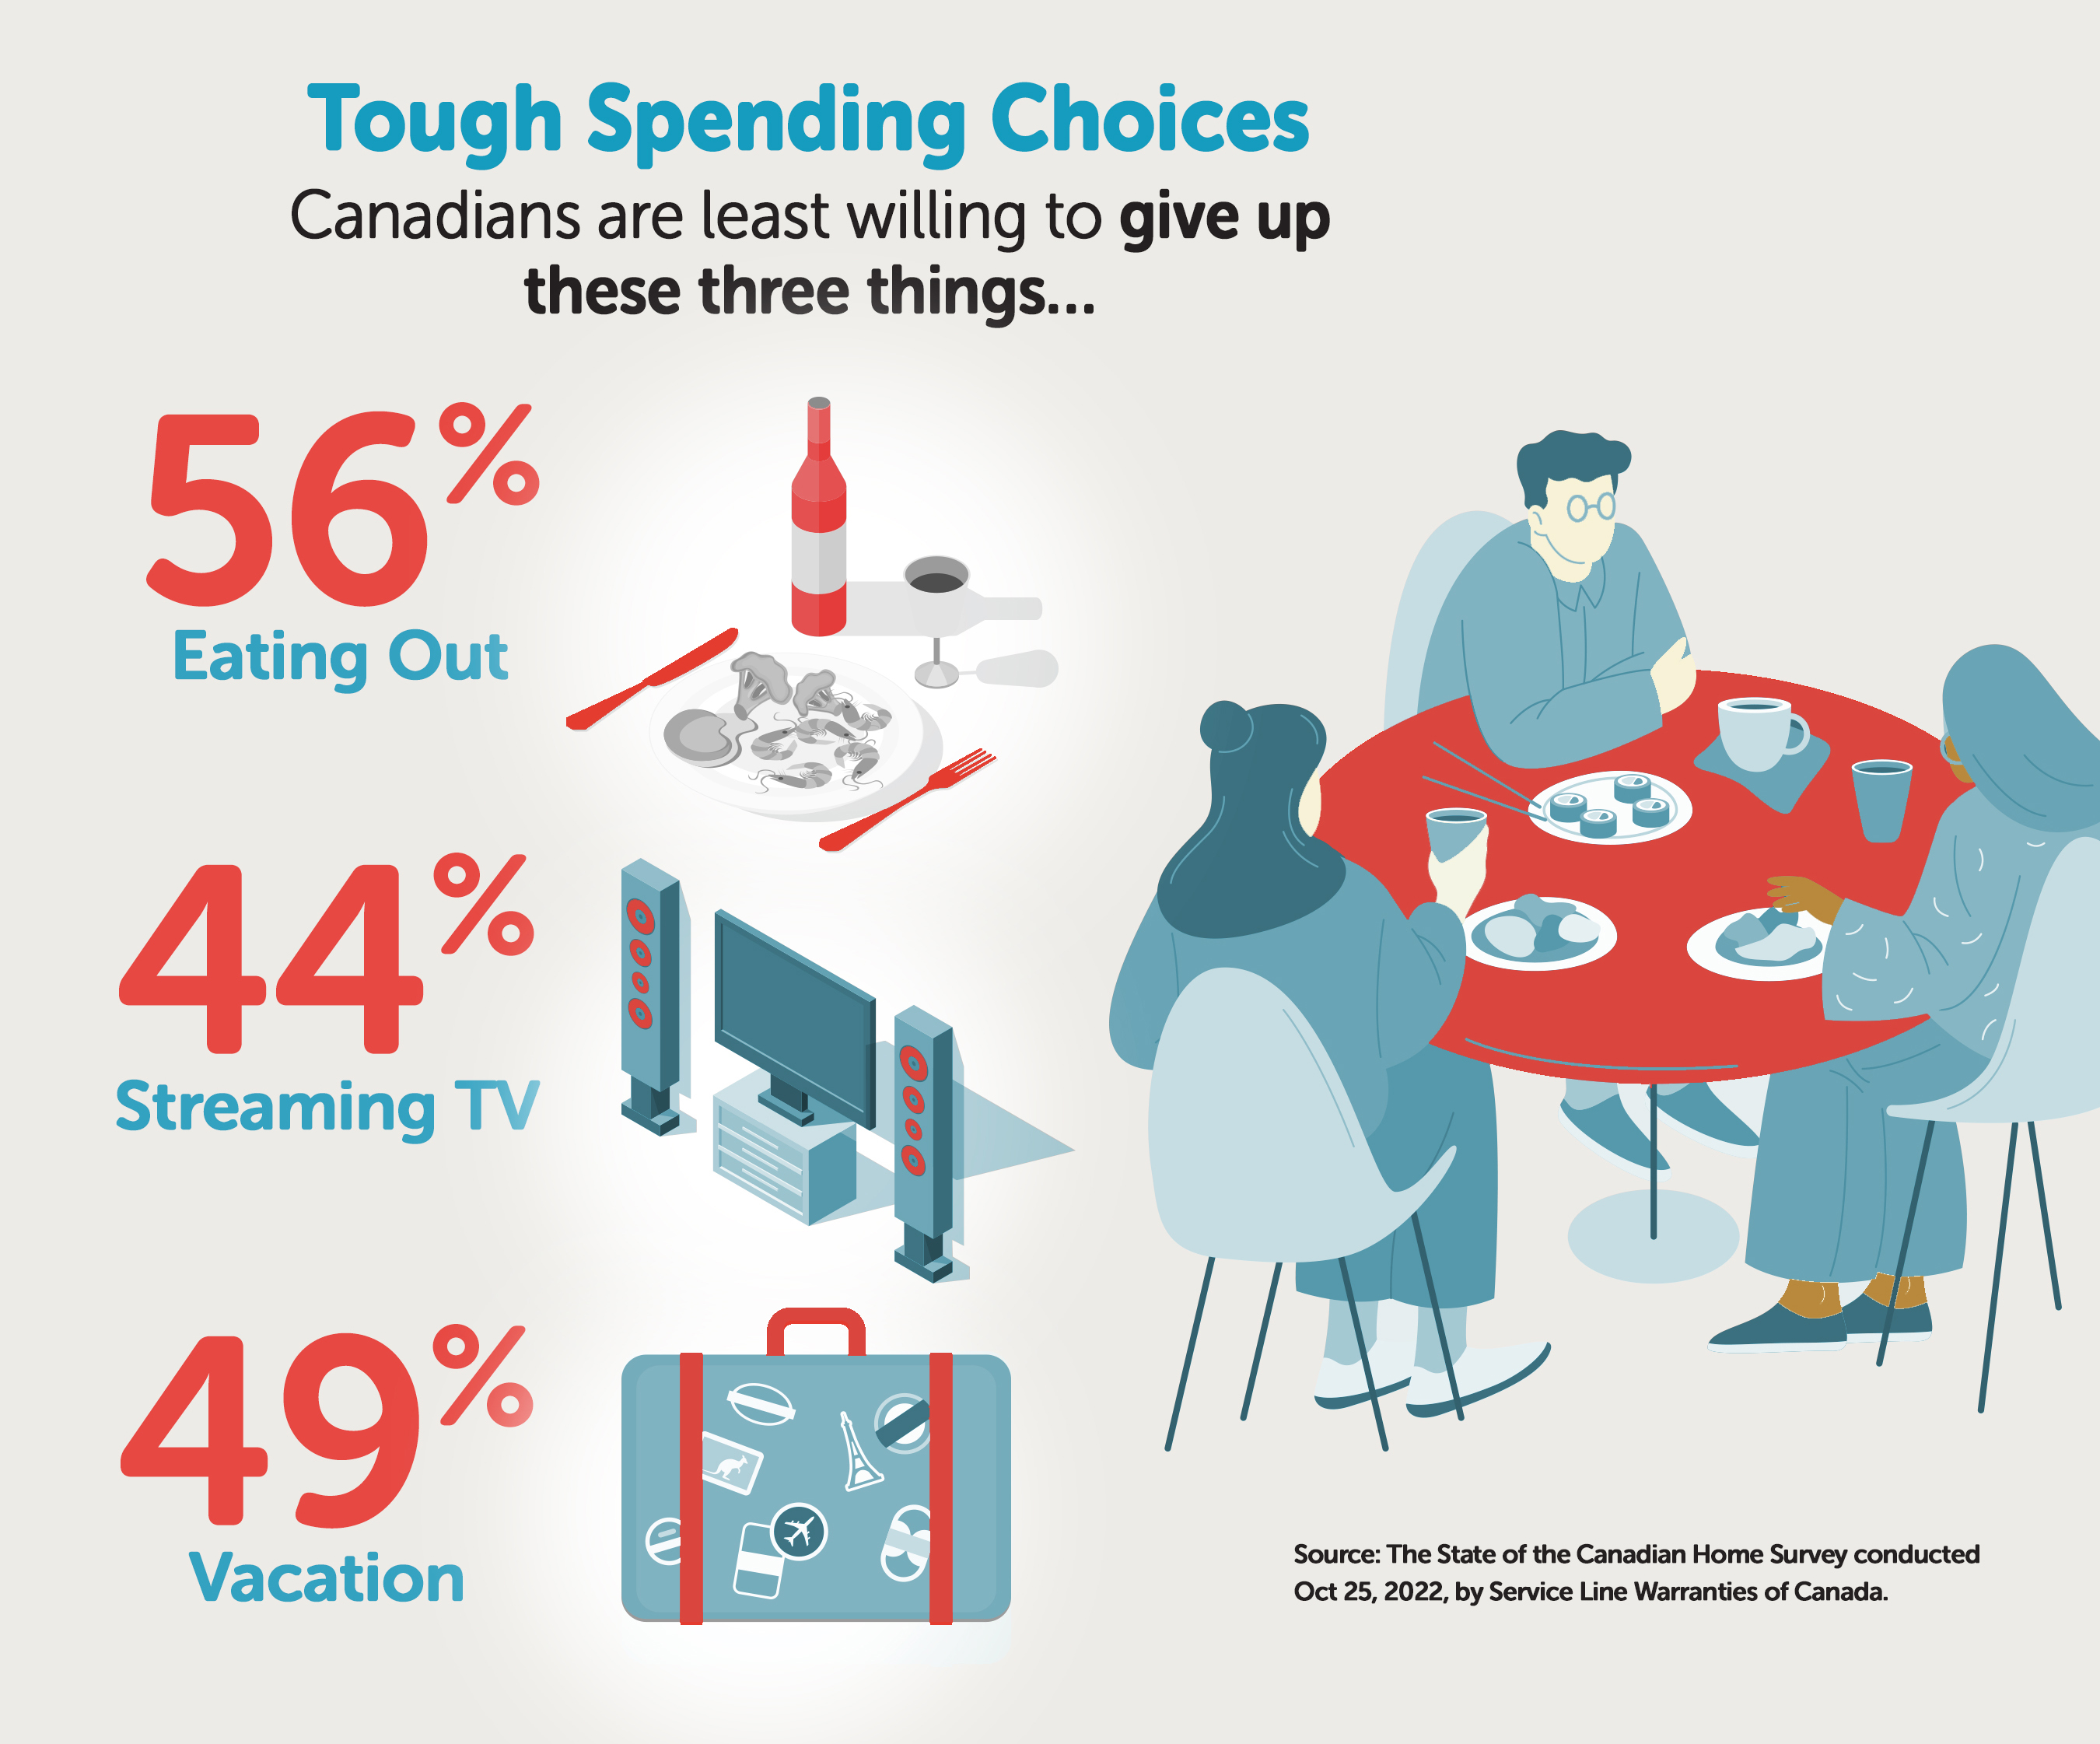 Canadians unwilling to give up dining out, vacation, and streaming TV service despite budget pressures from inflation